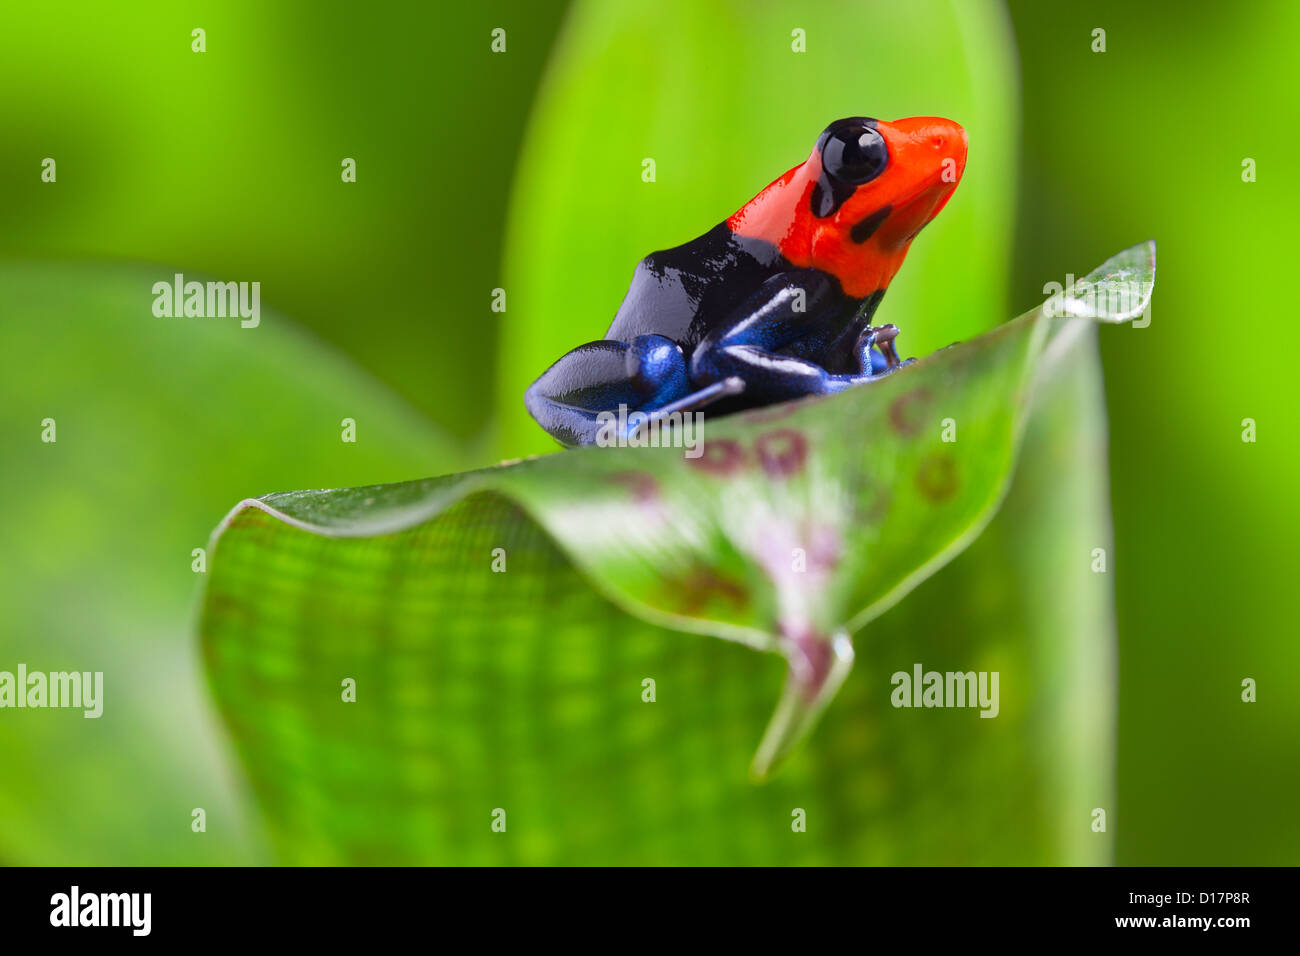 Peru Amazon frog in tropical rainforest small poison dart frog with red  head Stock Photo - Alamy